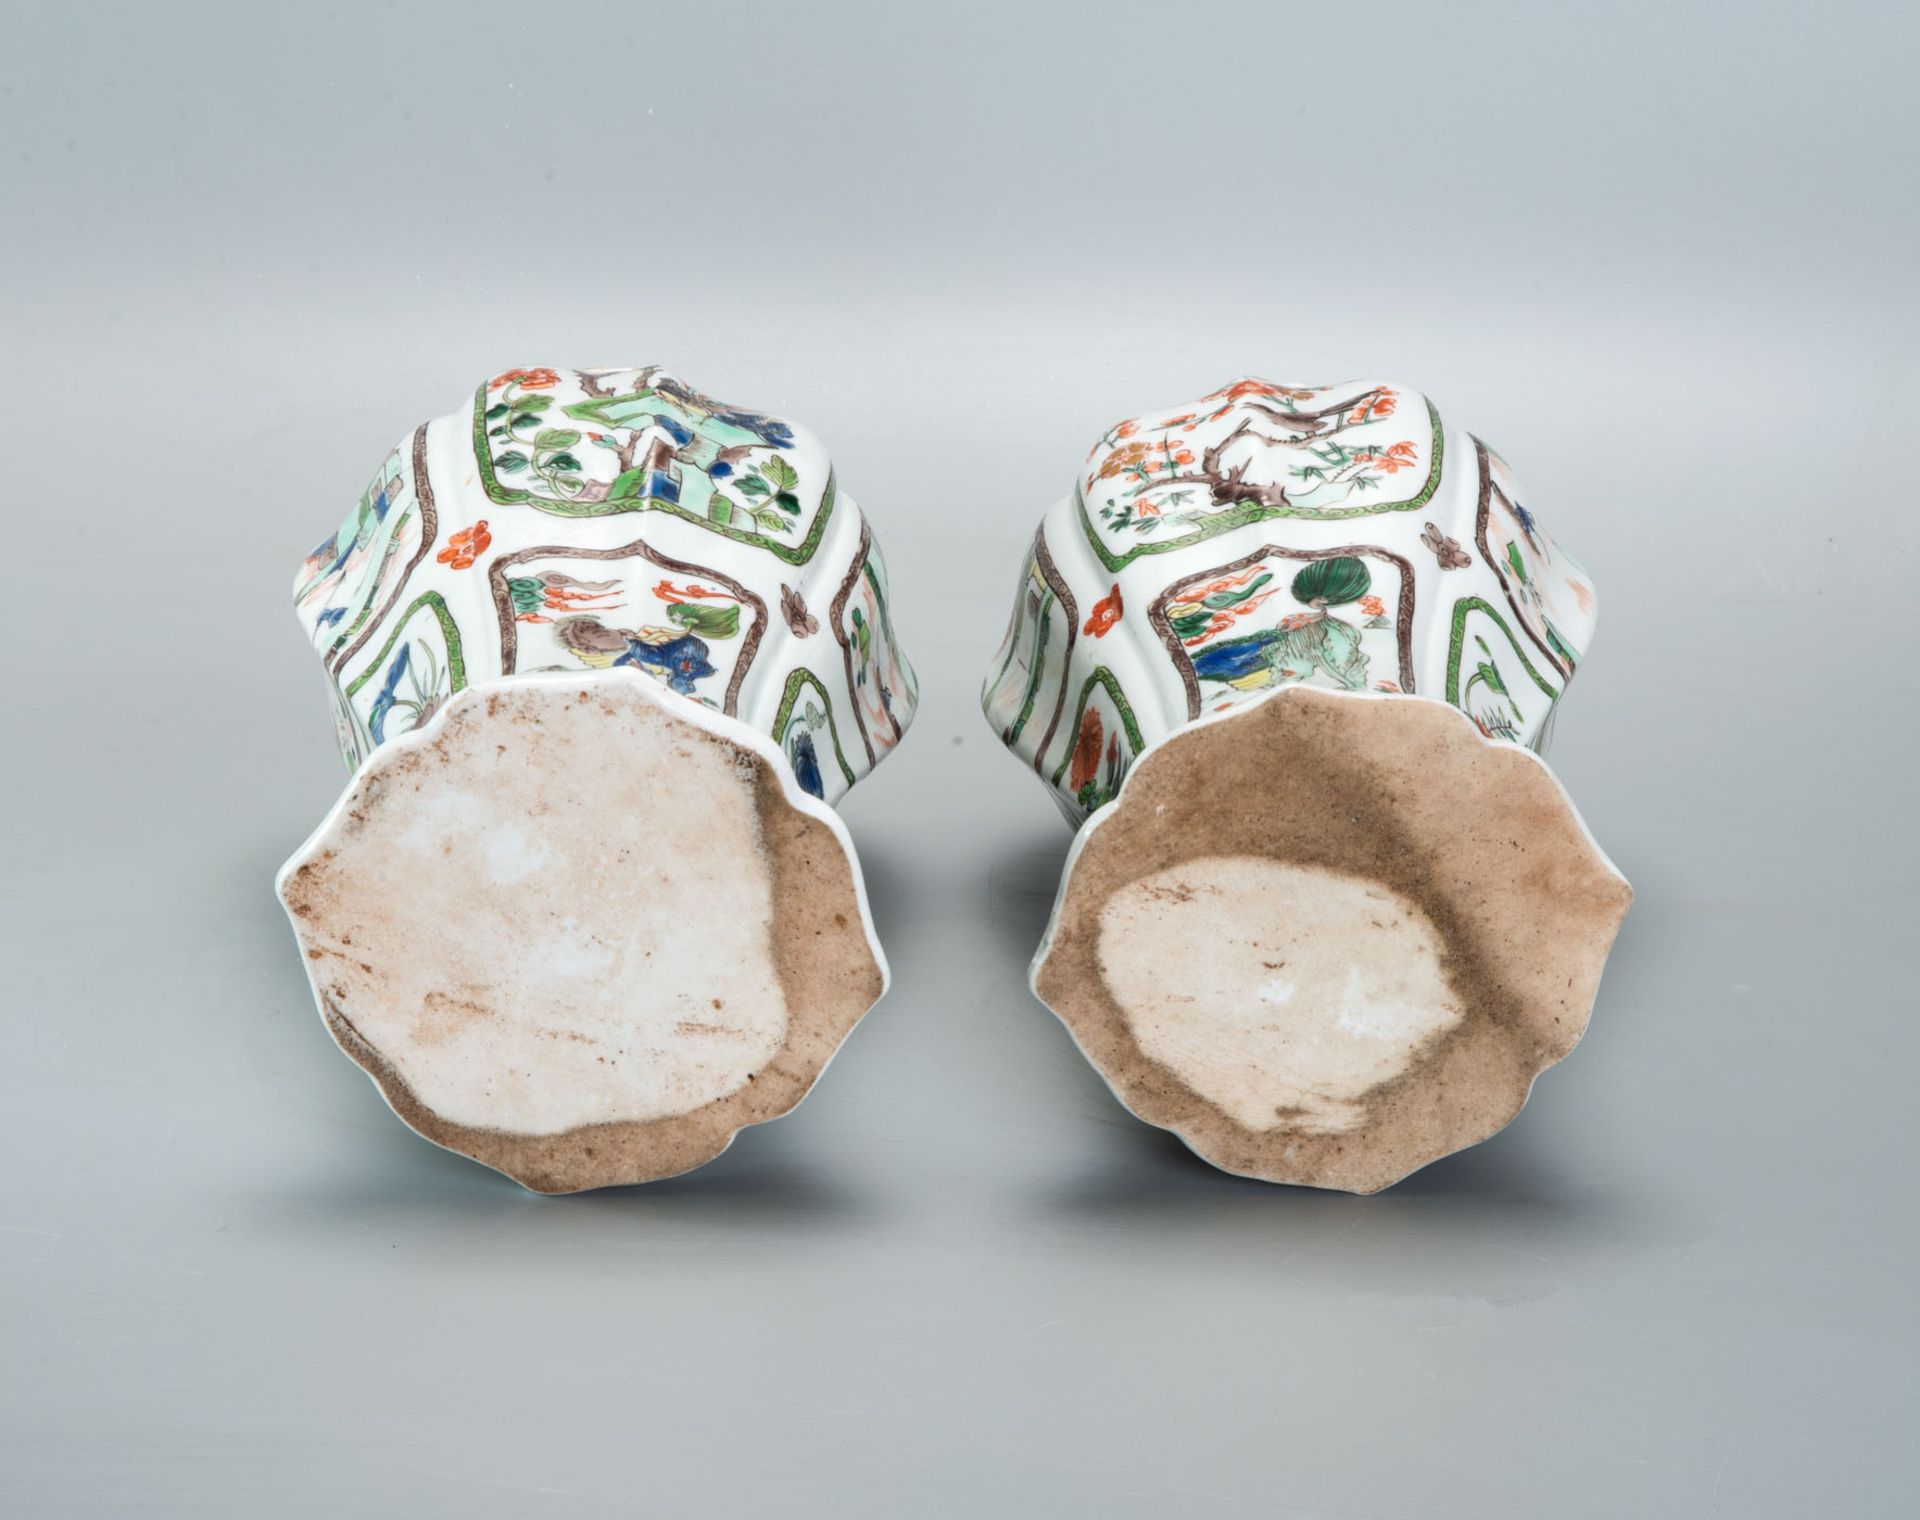 A Pair of Wucai Stoneware Lidded Vases, China, Qing Dynasty, 18th Century - Image 6 of 6